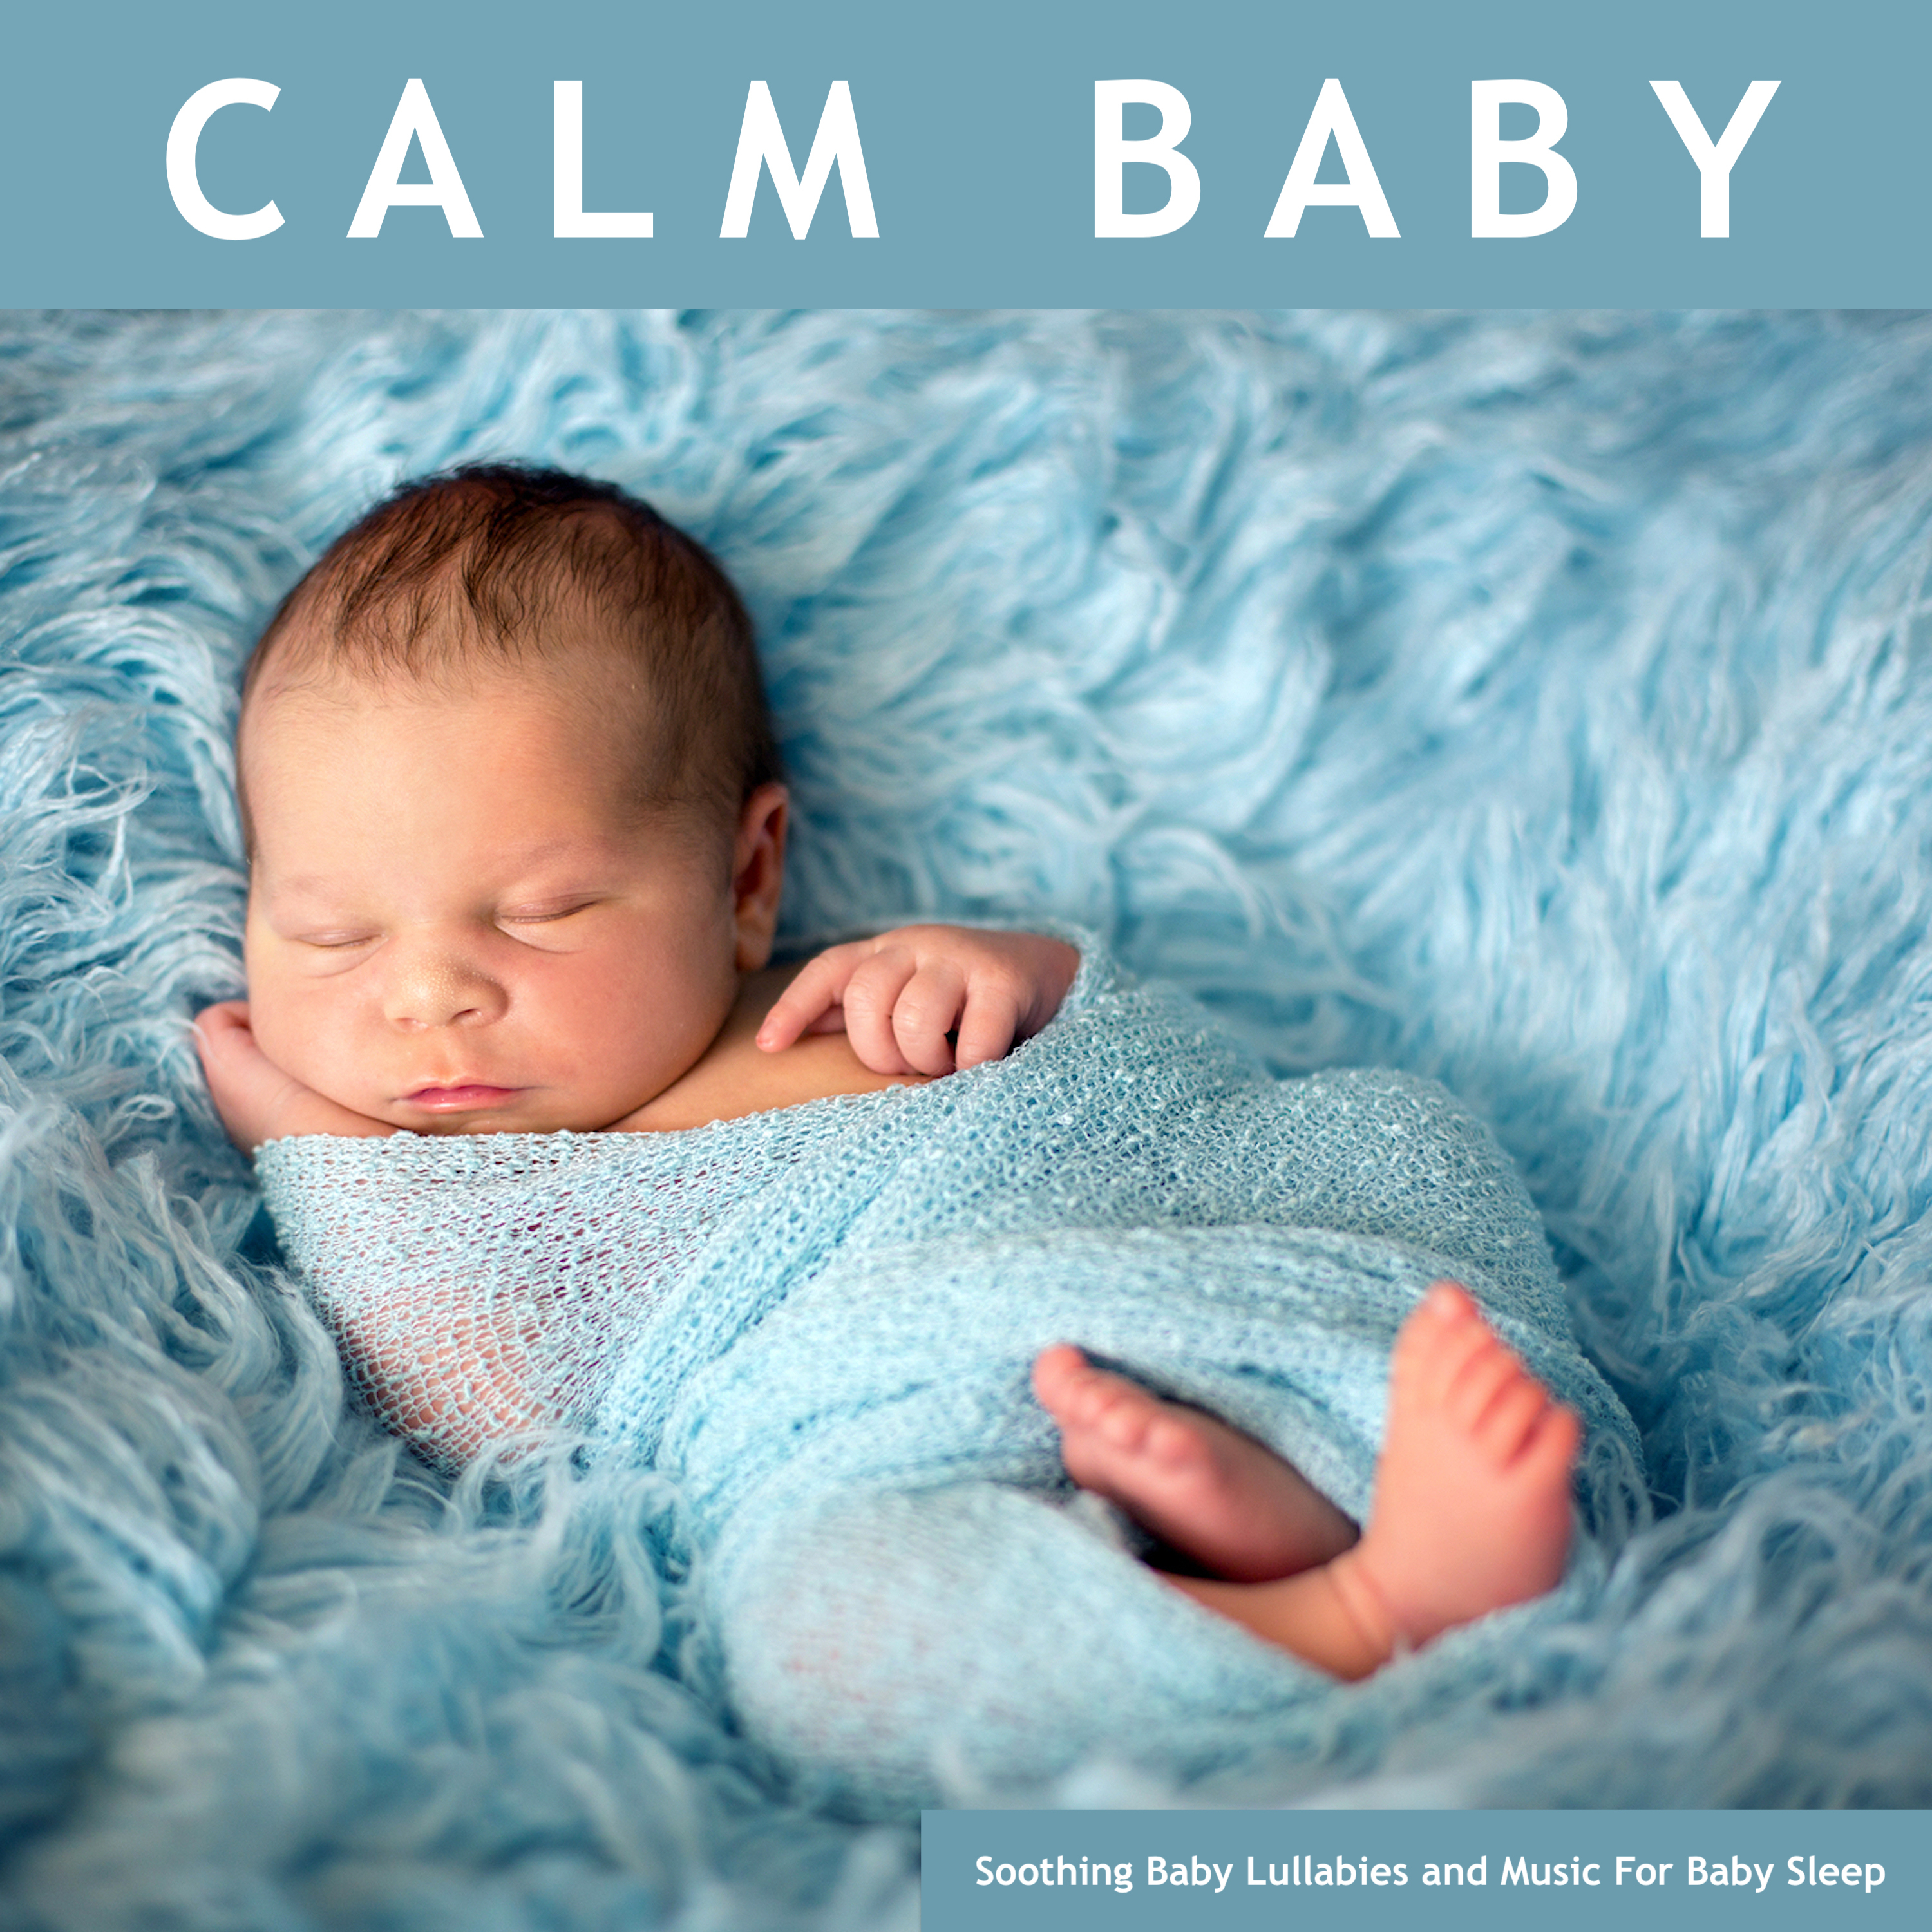 Calm Baby: Soothing Baby Lullabies and Music For Baby Sleep